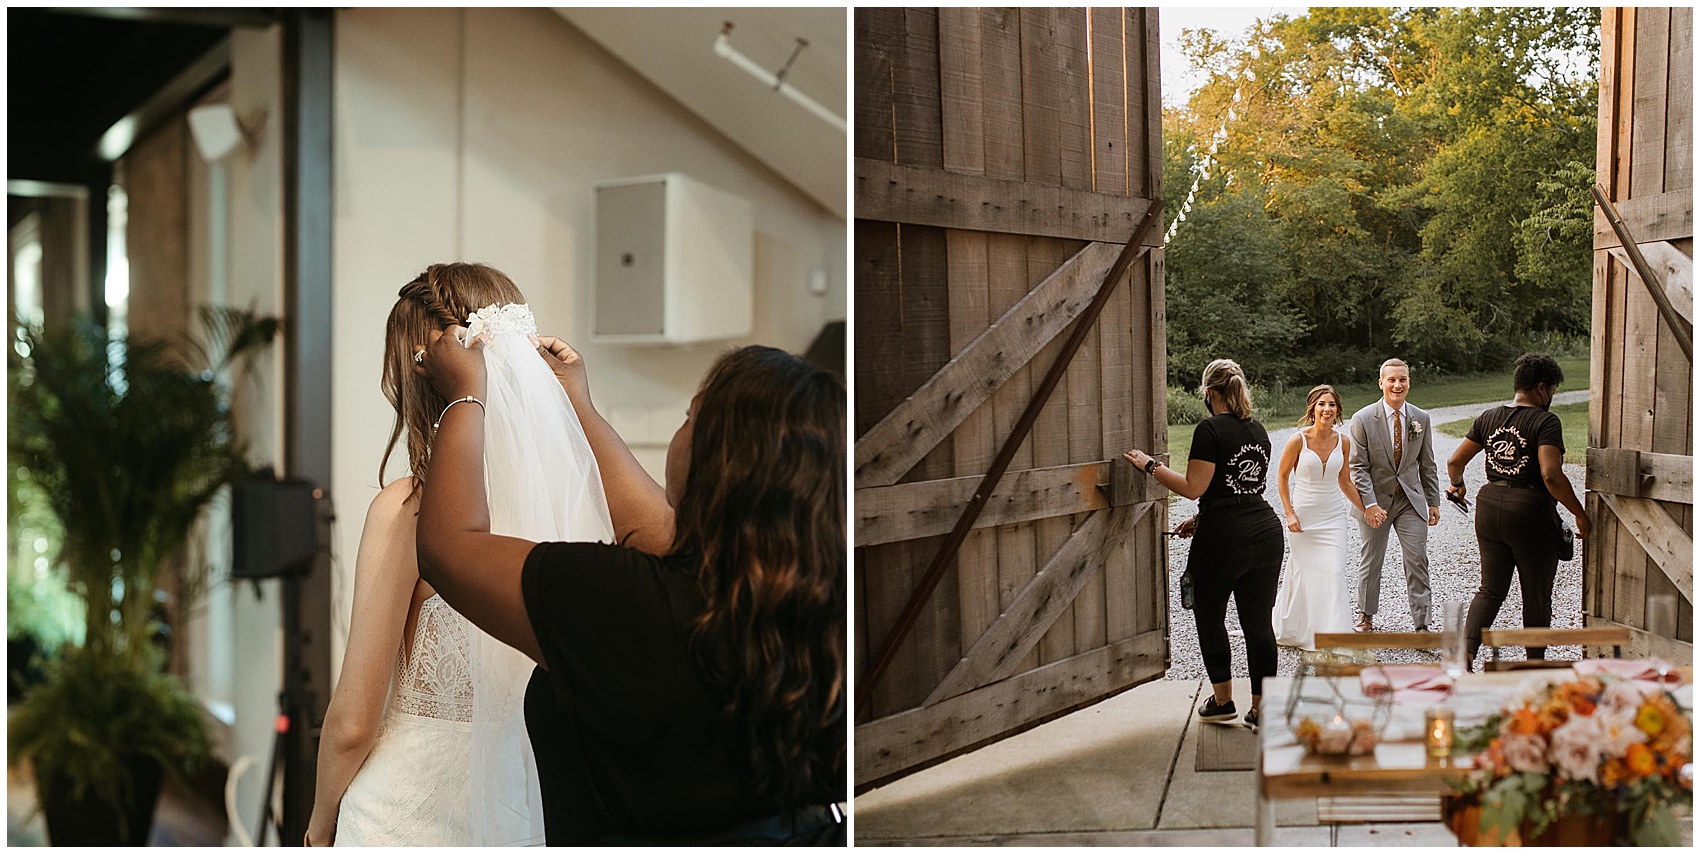 Wedding planners open large barn doors for the bride and groom entrance PLS Coordinate